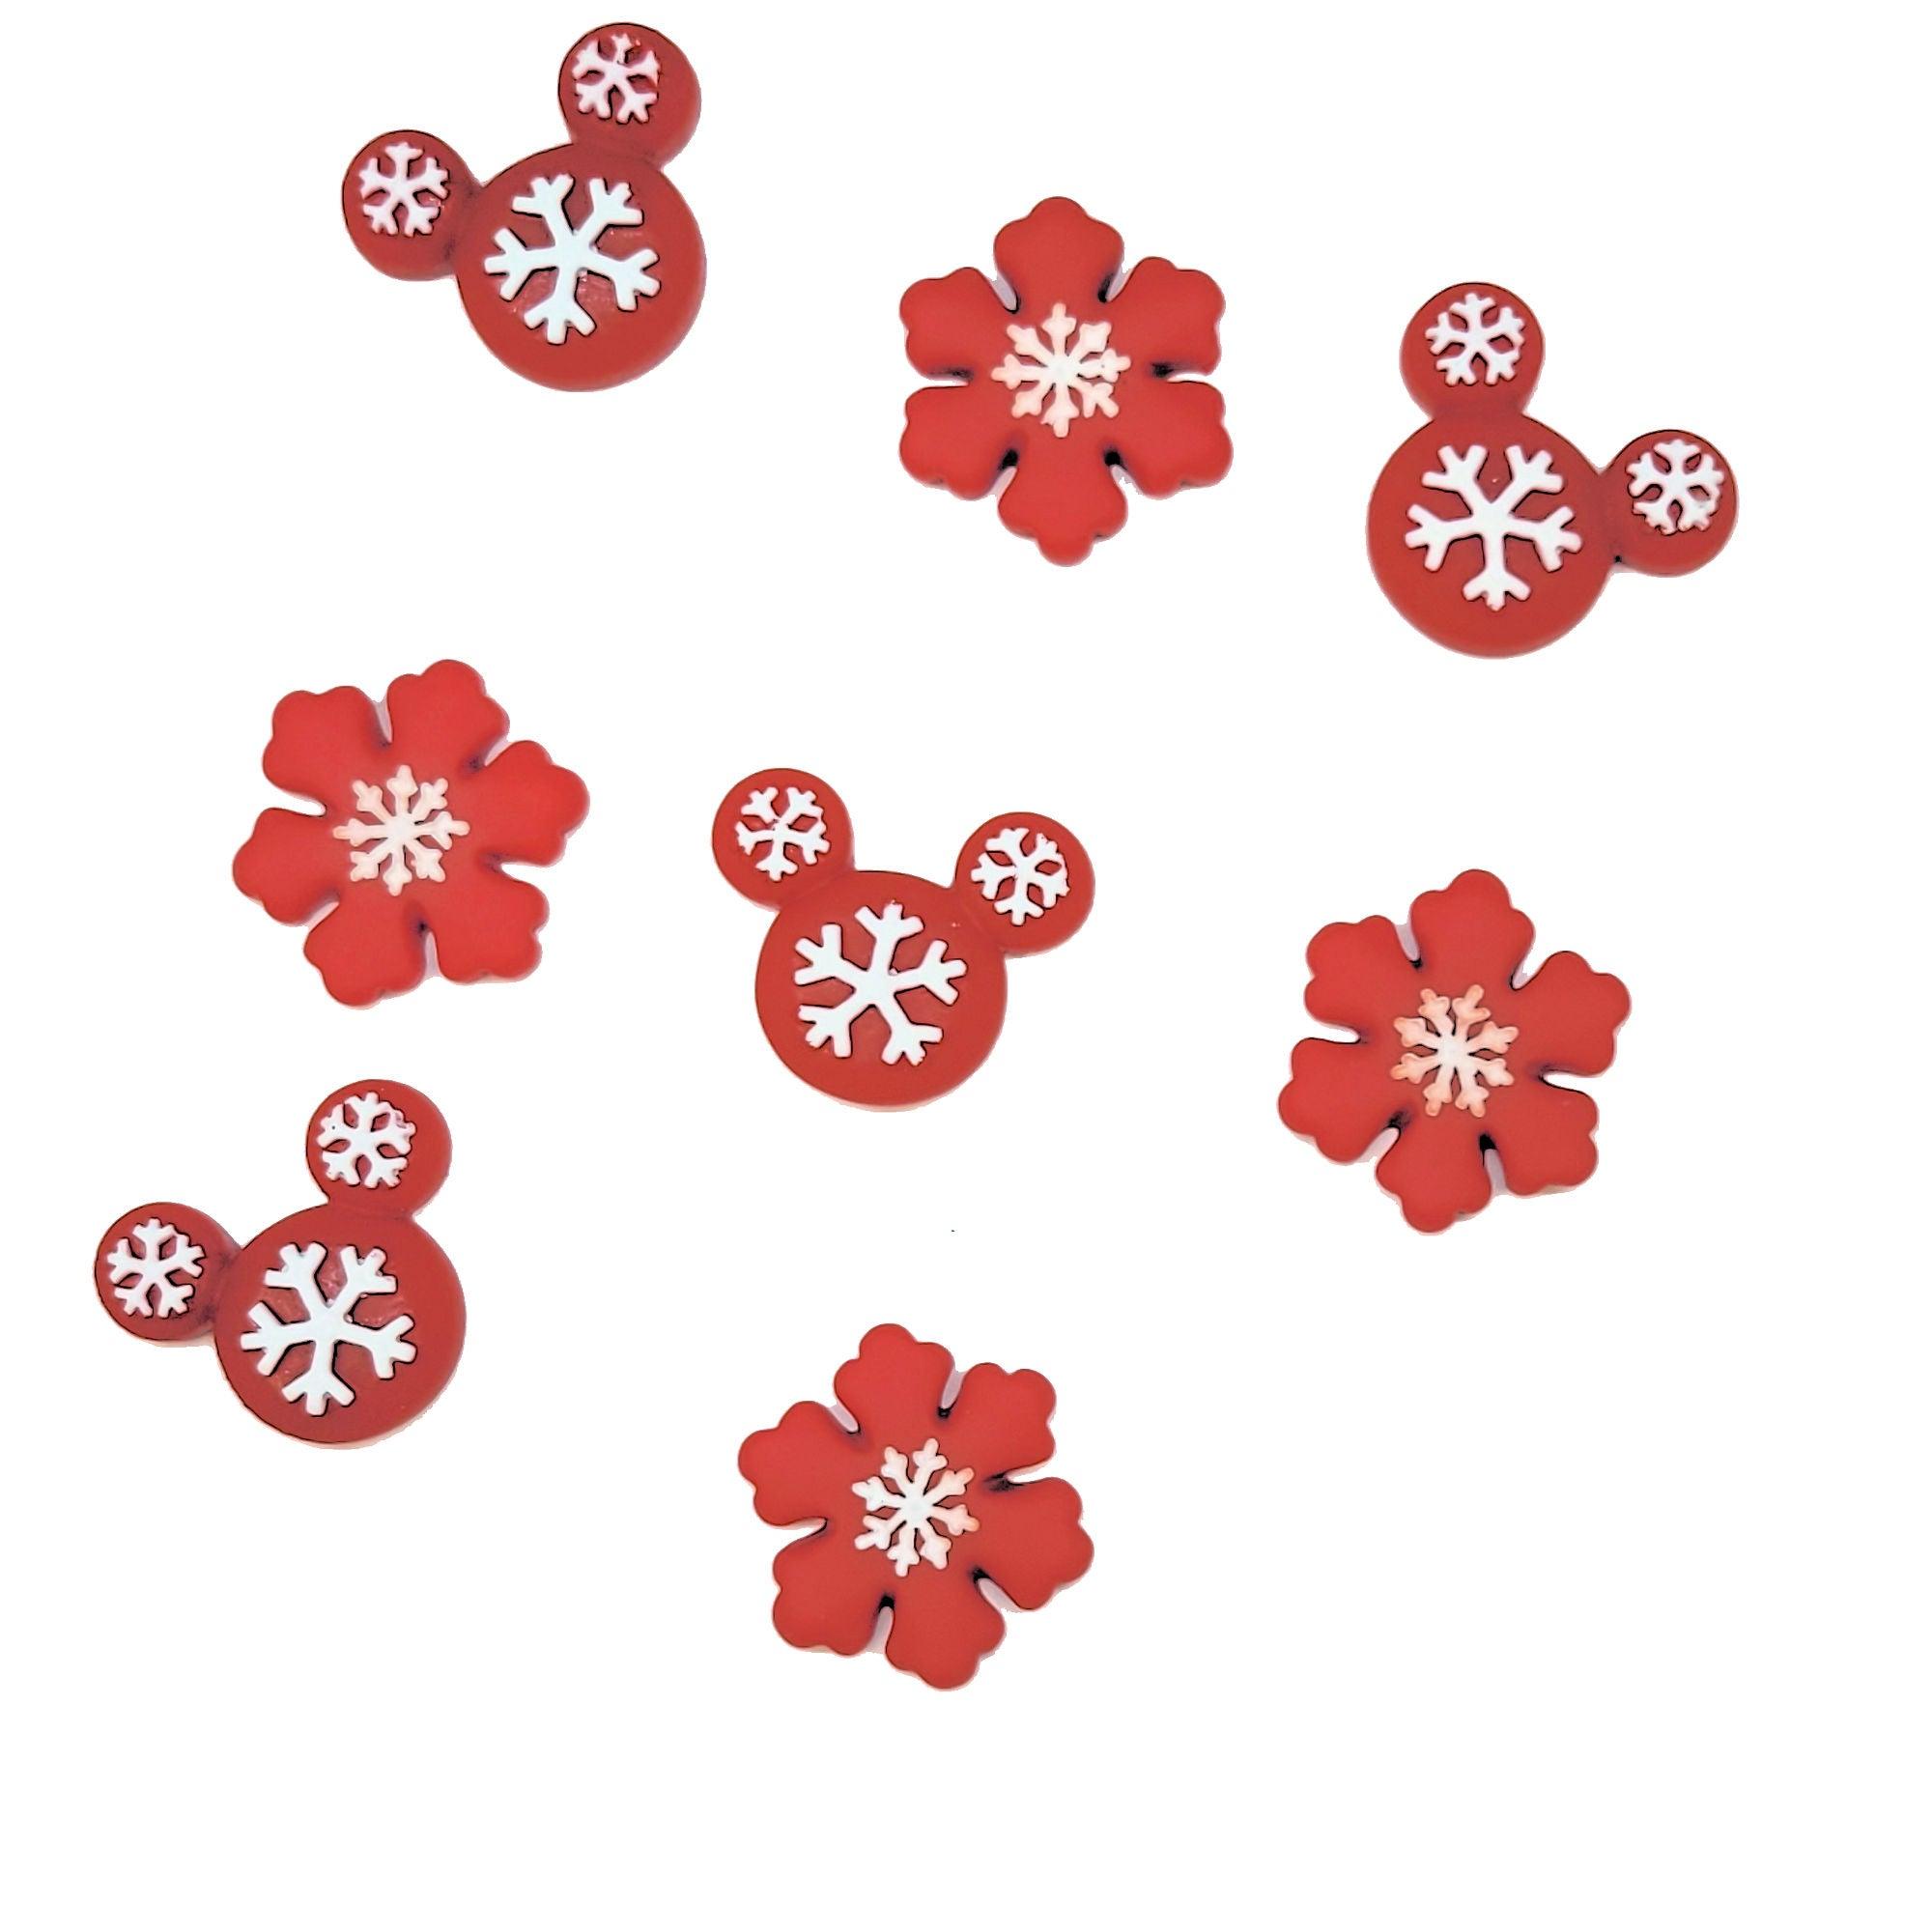 Disneyana Collection Snowflakes & Snowflake Mouse Ears Flatback Scrapbook Buttons by SSC Designs - 8 Pieces